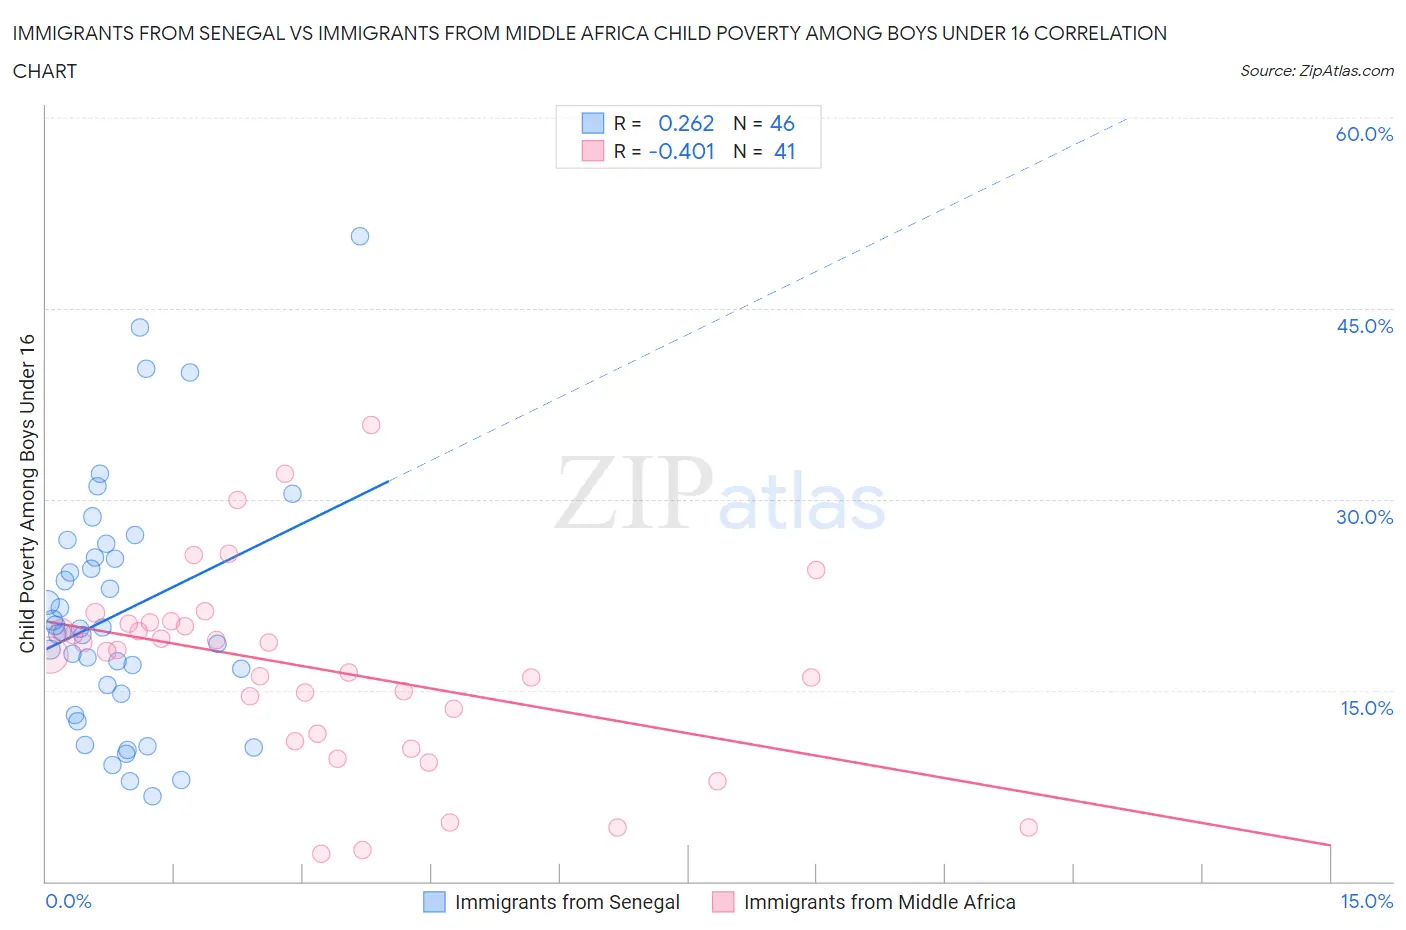 Immigrants from Senegal vs Immigrants from Middle Africa Child Poverty Among Boys Under 16